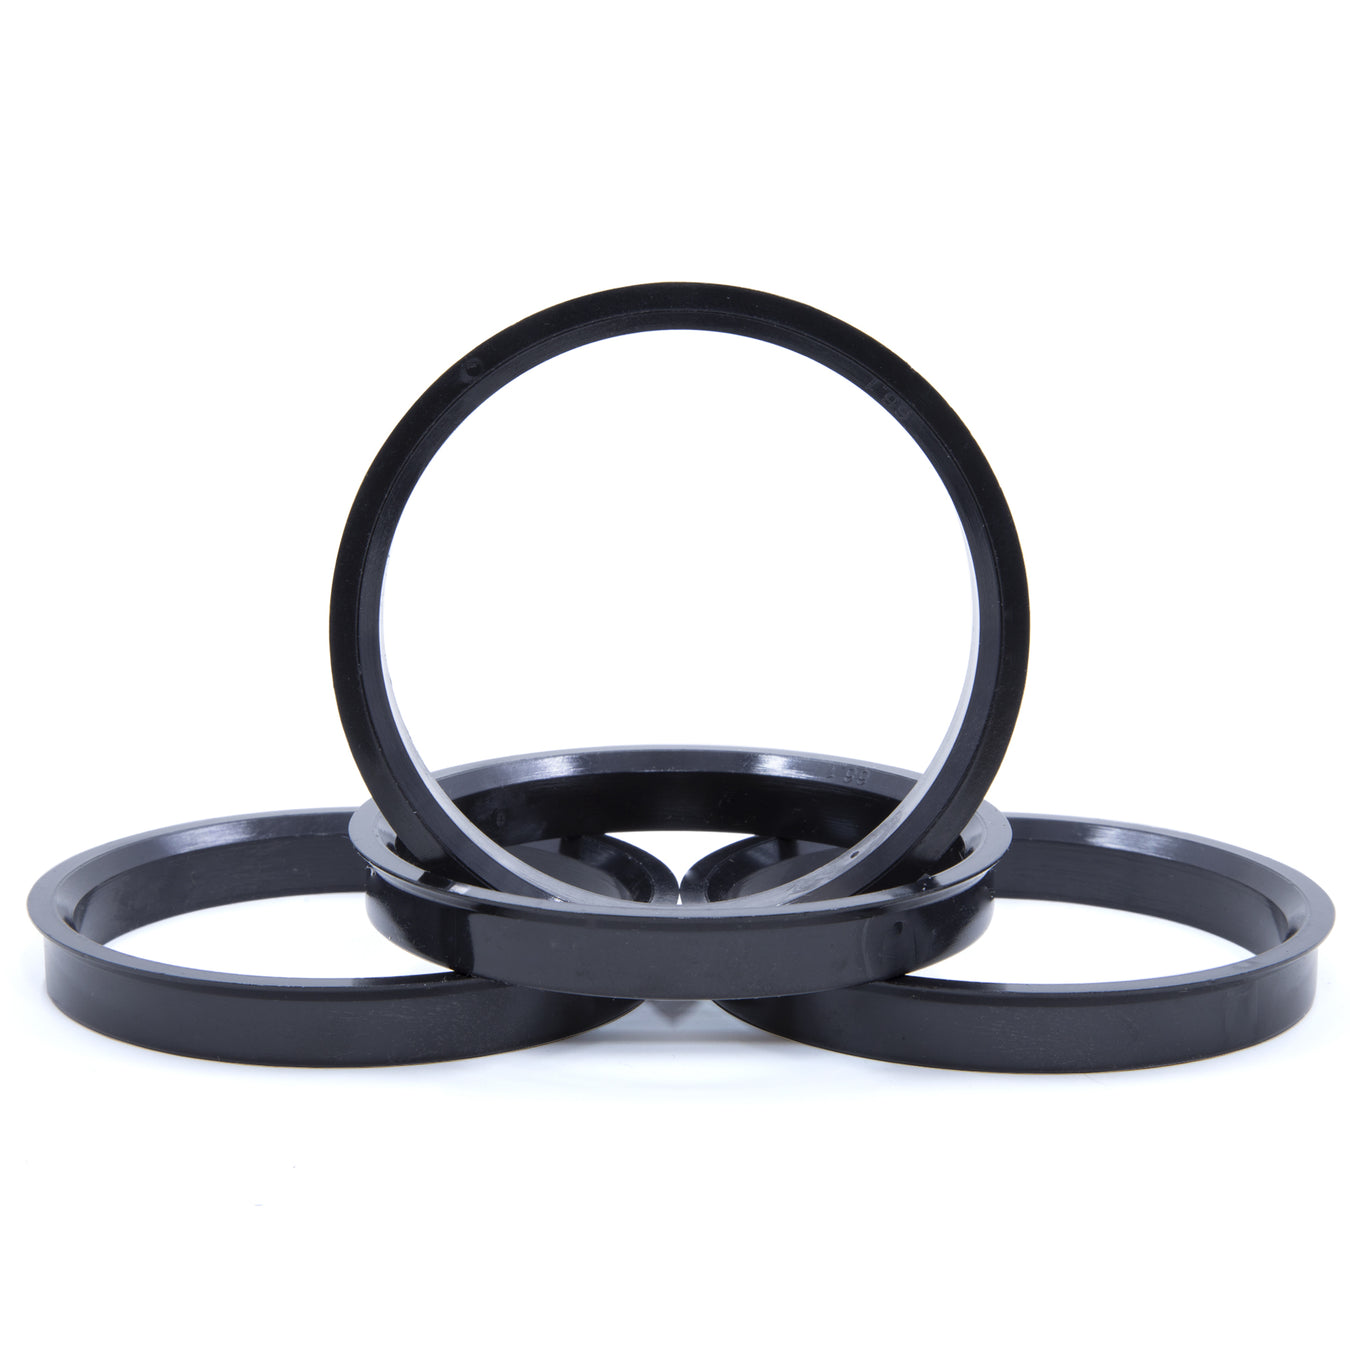 Hub Centric Rings available in Nylon, Plastic and Aluminum. Easy online shopping at lugnutguys.com